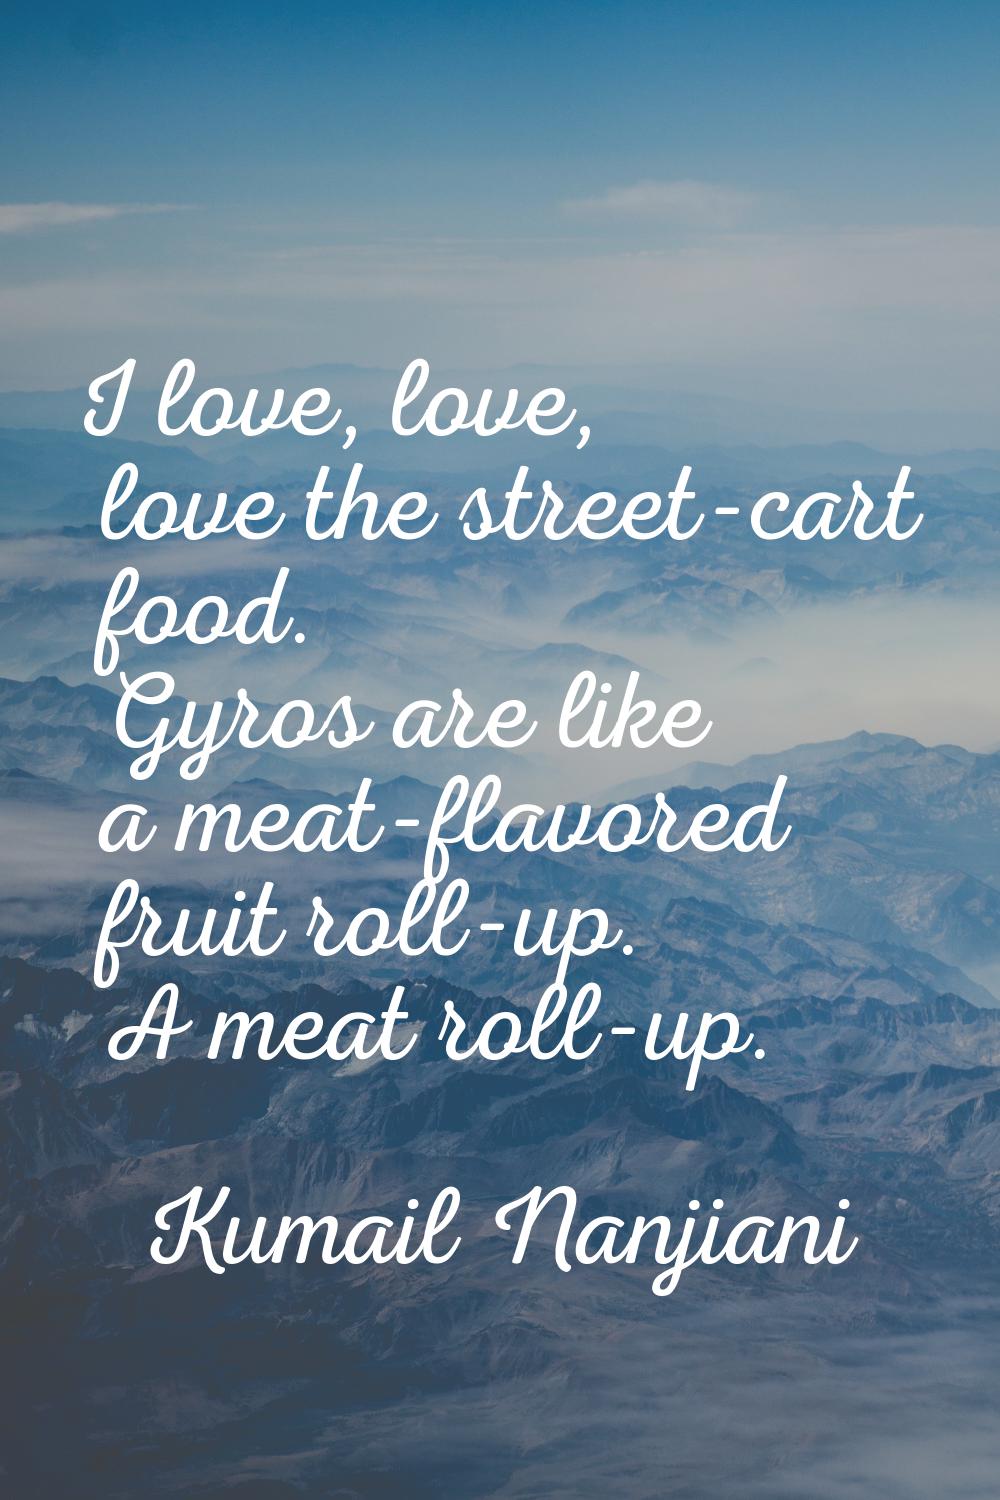 I love, love, love the street-cart food. Gyros are like a meat-flavored fruit roll-up. A meat roll-